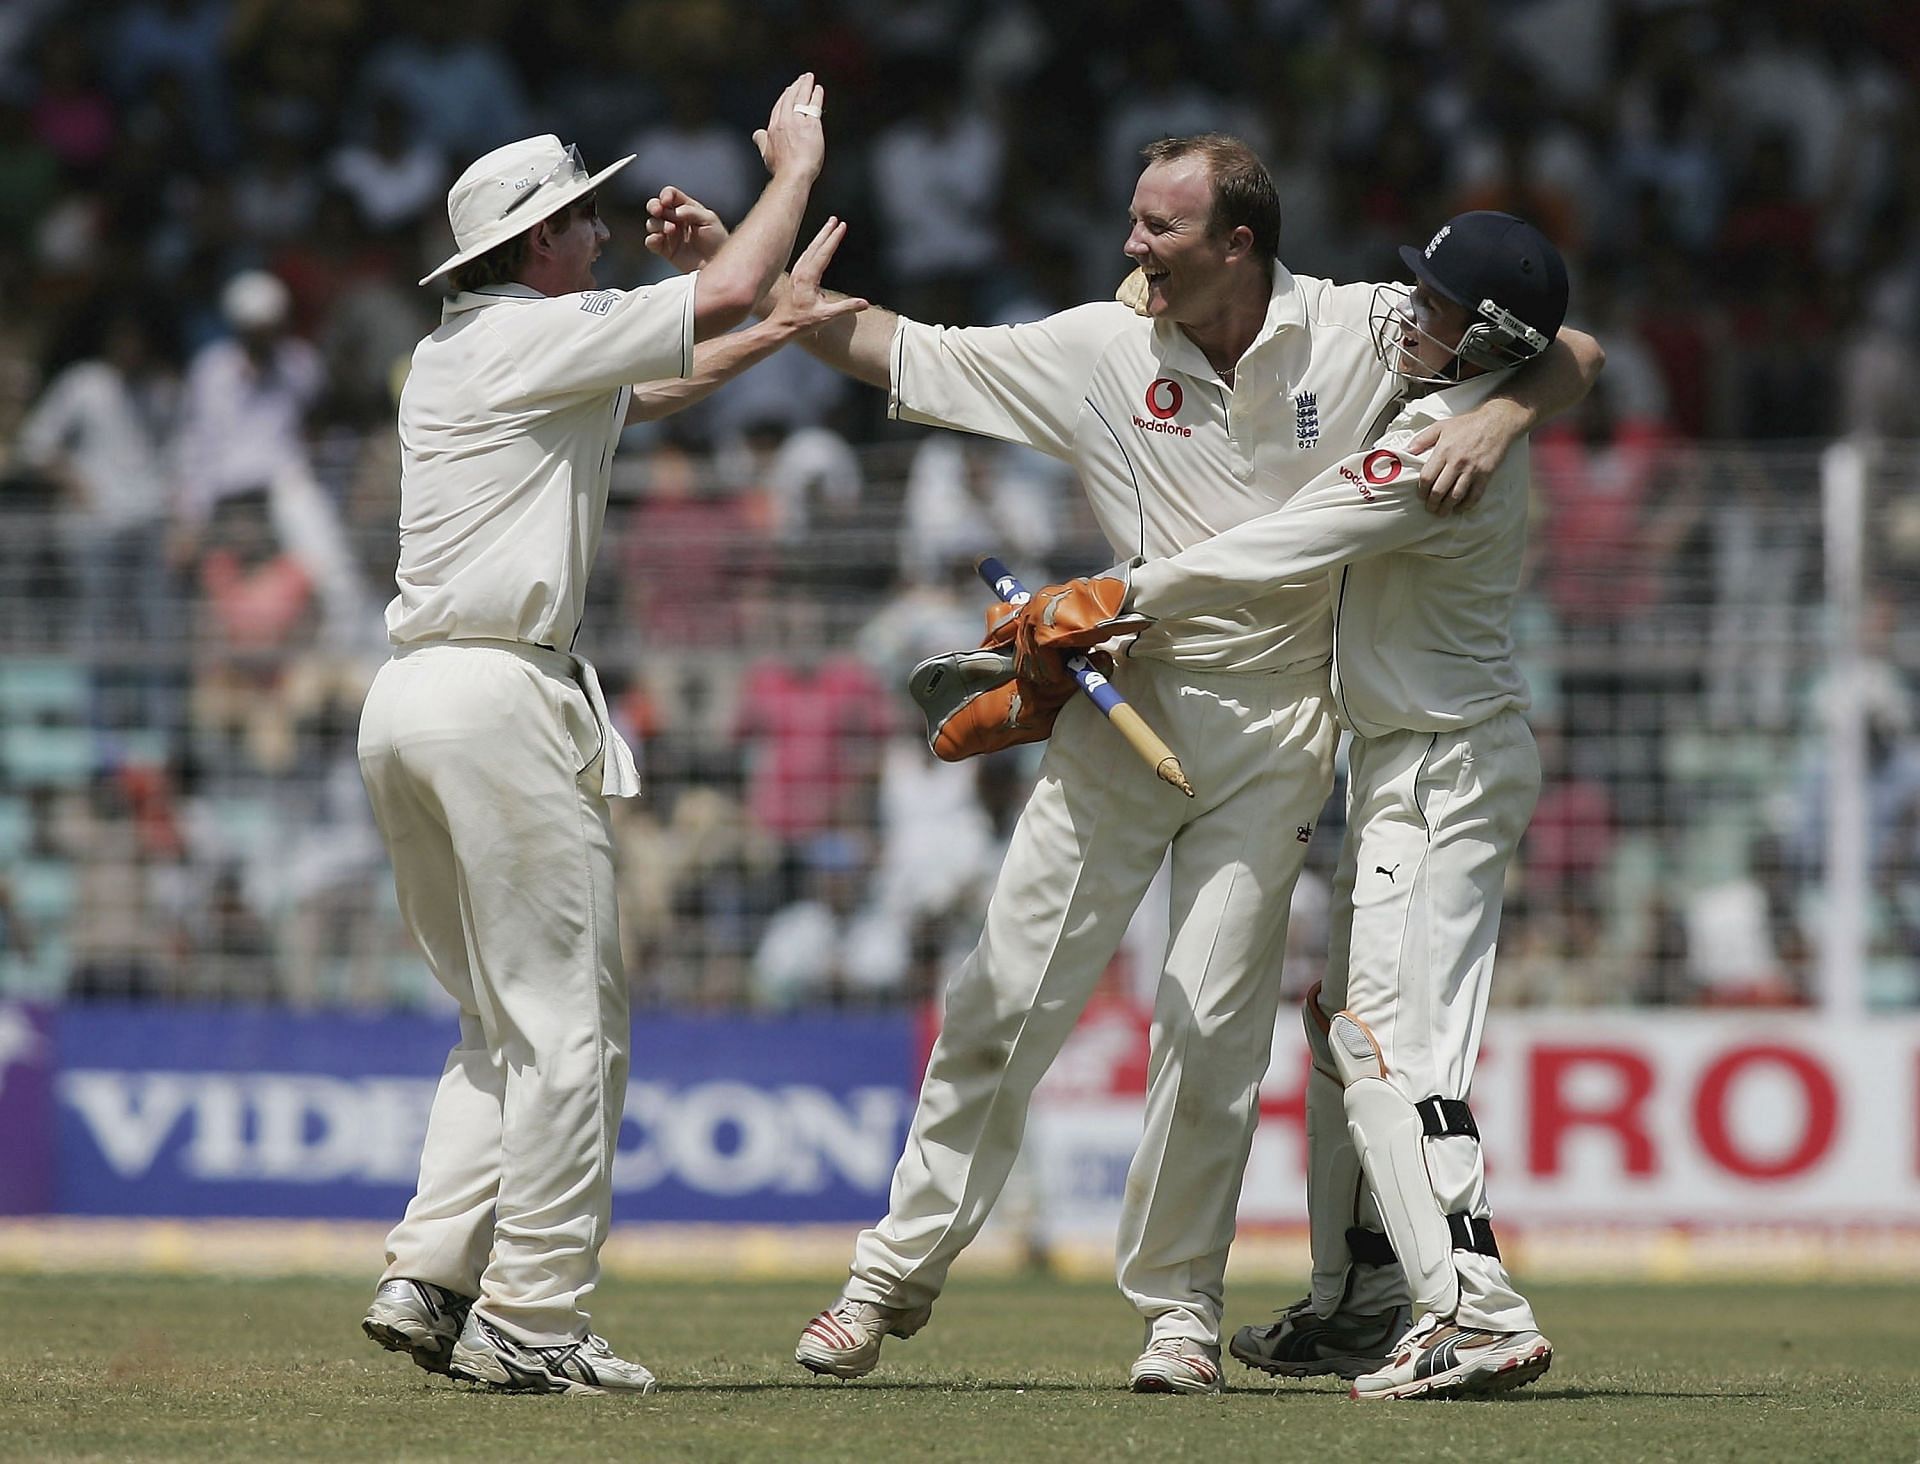 Shaun Udal&rsquo;s four-fer stunned India in the 2005-06 Mumbai Test. (Pic: Getty Images)